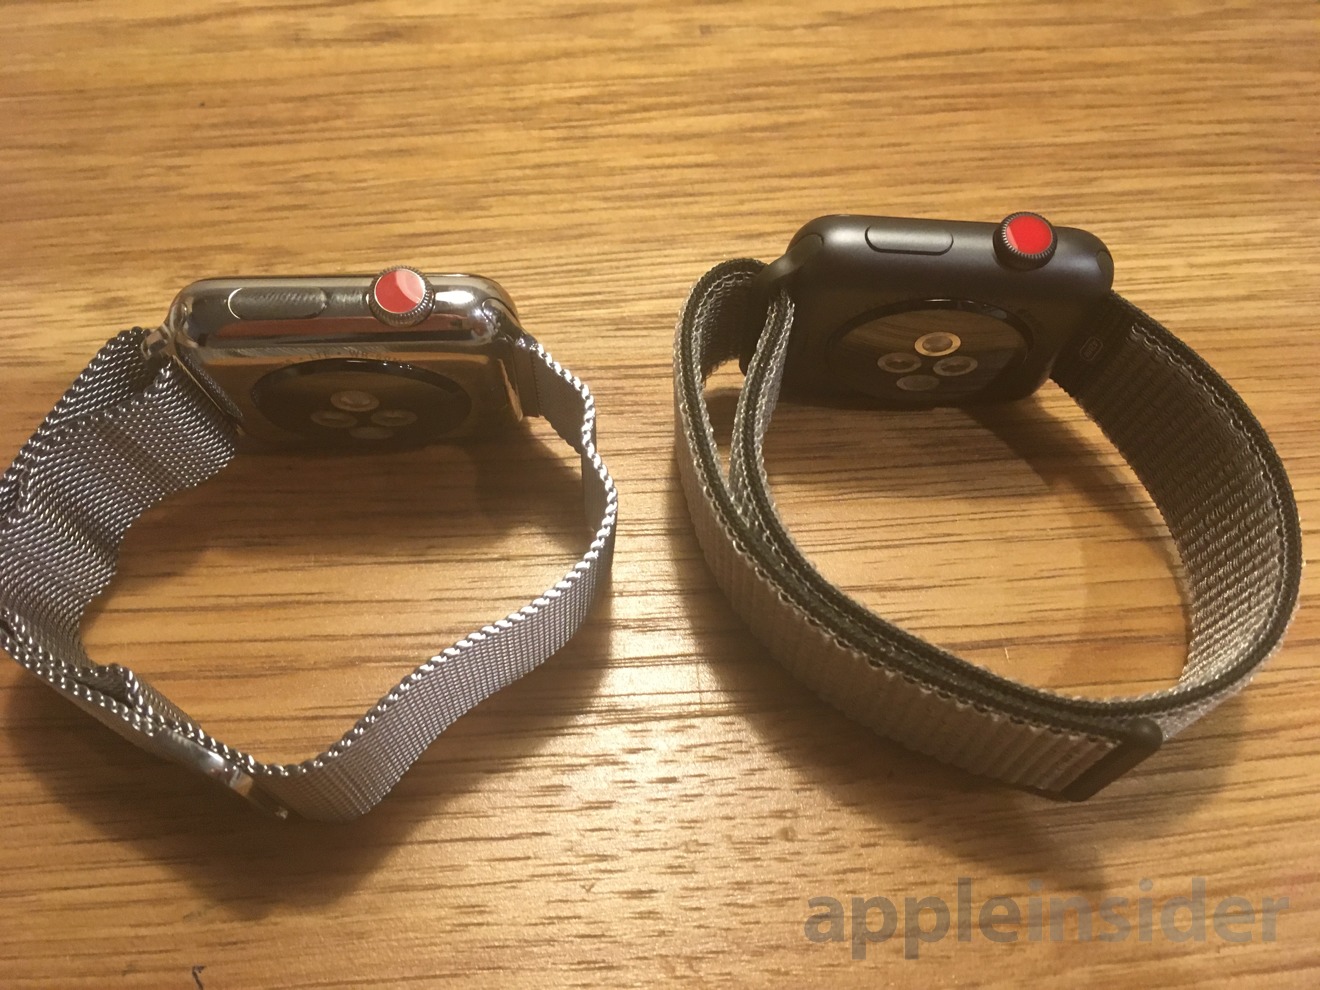 First look: Apple Watch Series 3 with cellular: stainless steel vs. aluminum